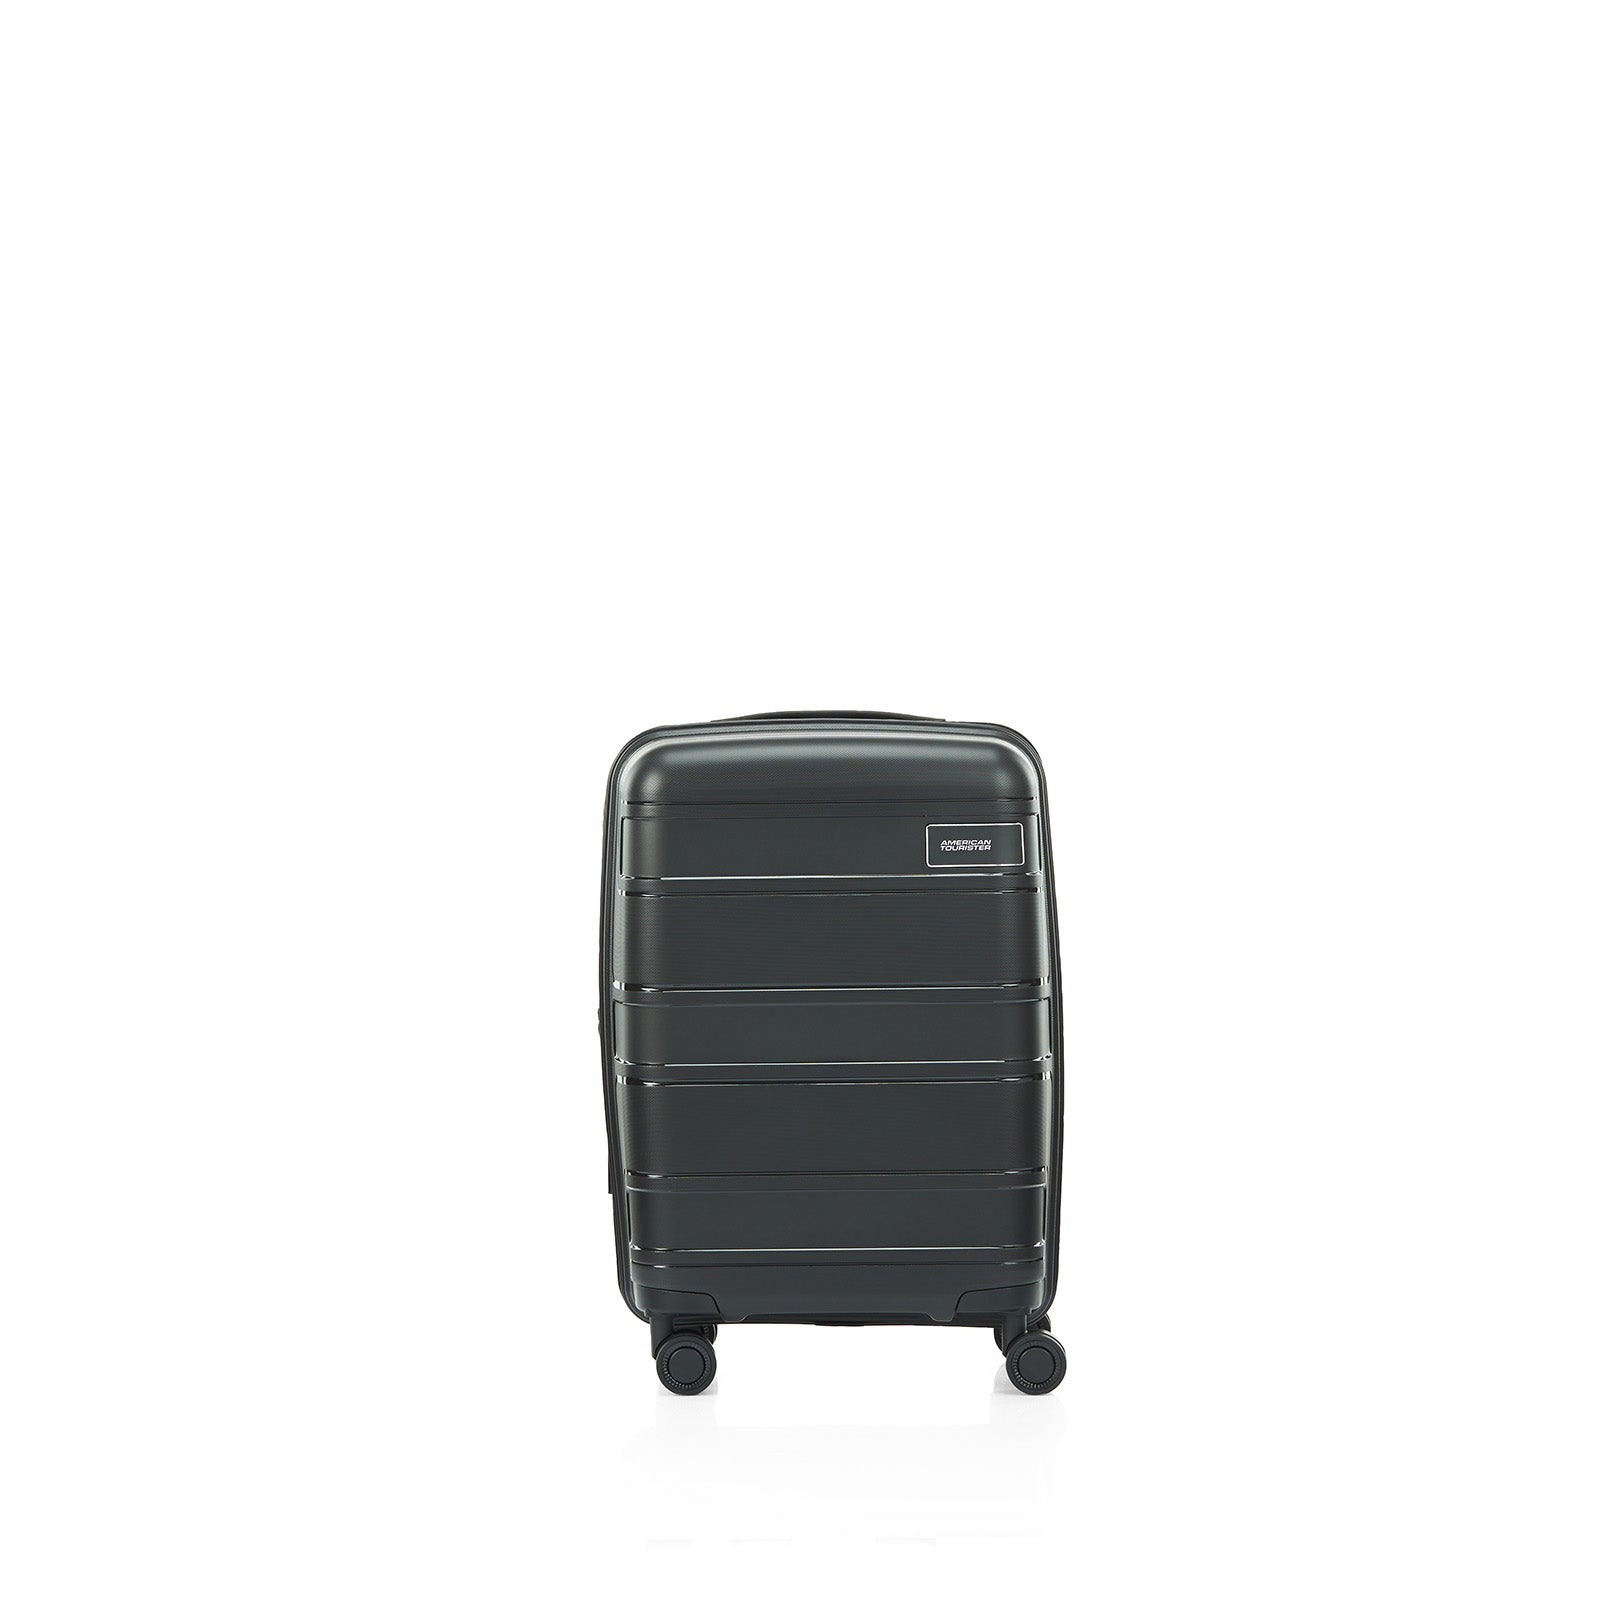 American-Tourister-Light-Max-55cm-Carry-On-Suitcase-Black-Front